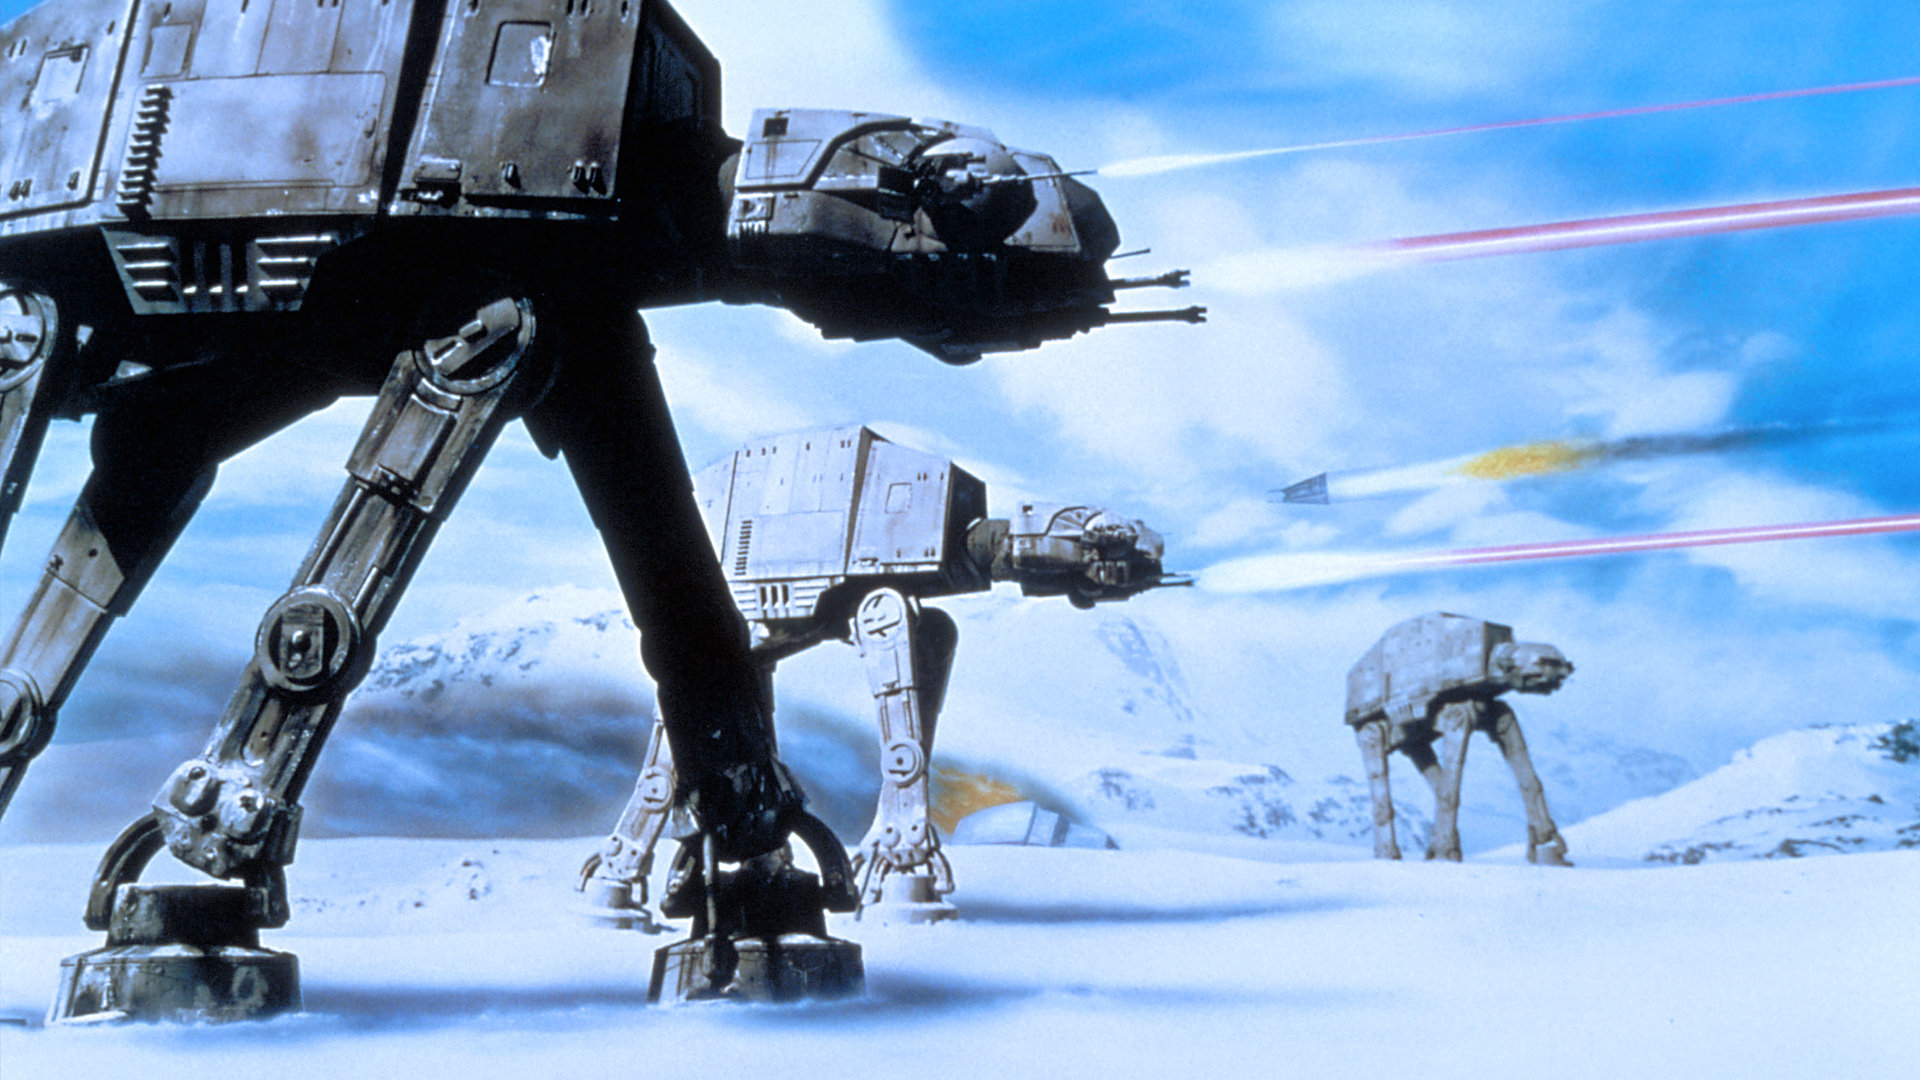 25 Star Wars Episode V: The Empire Strikes Back HD Wallpapers | Backgrounds - Wallpaper Abyss